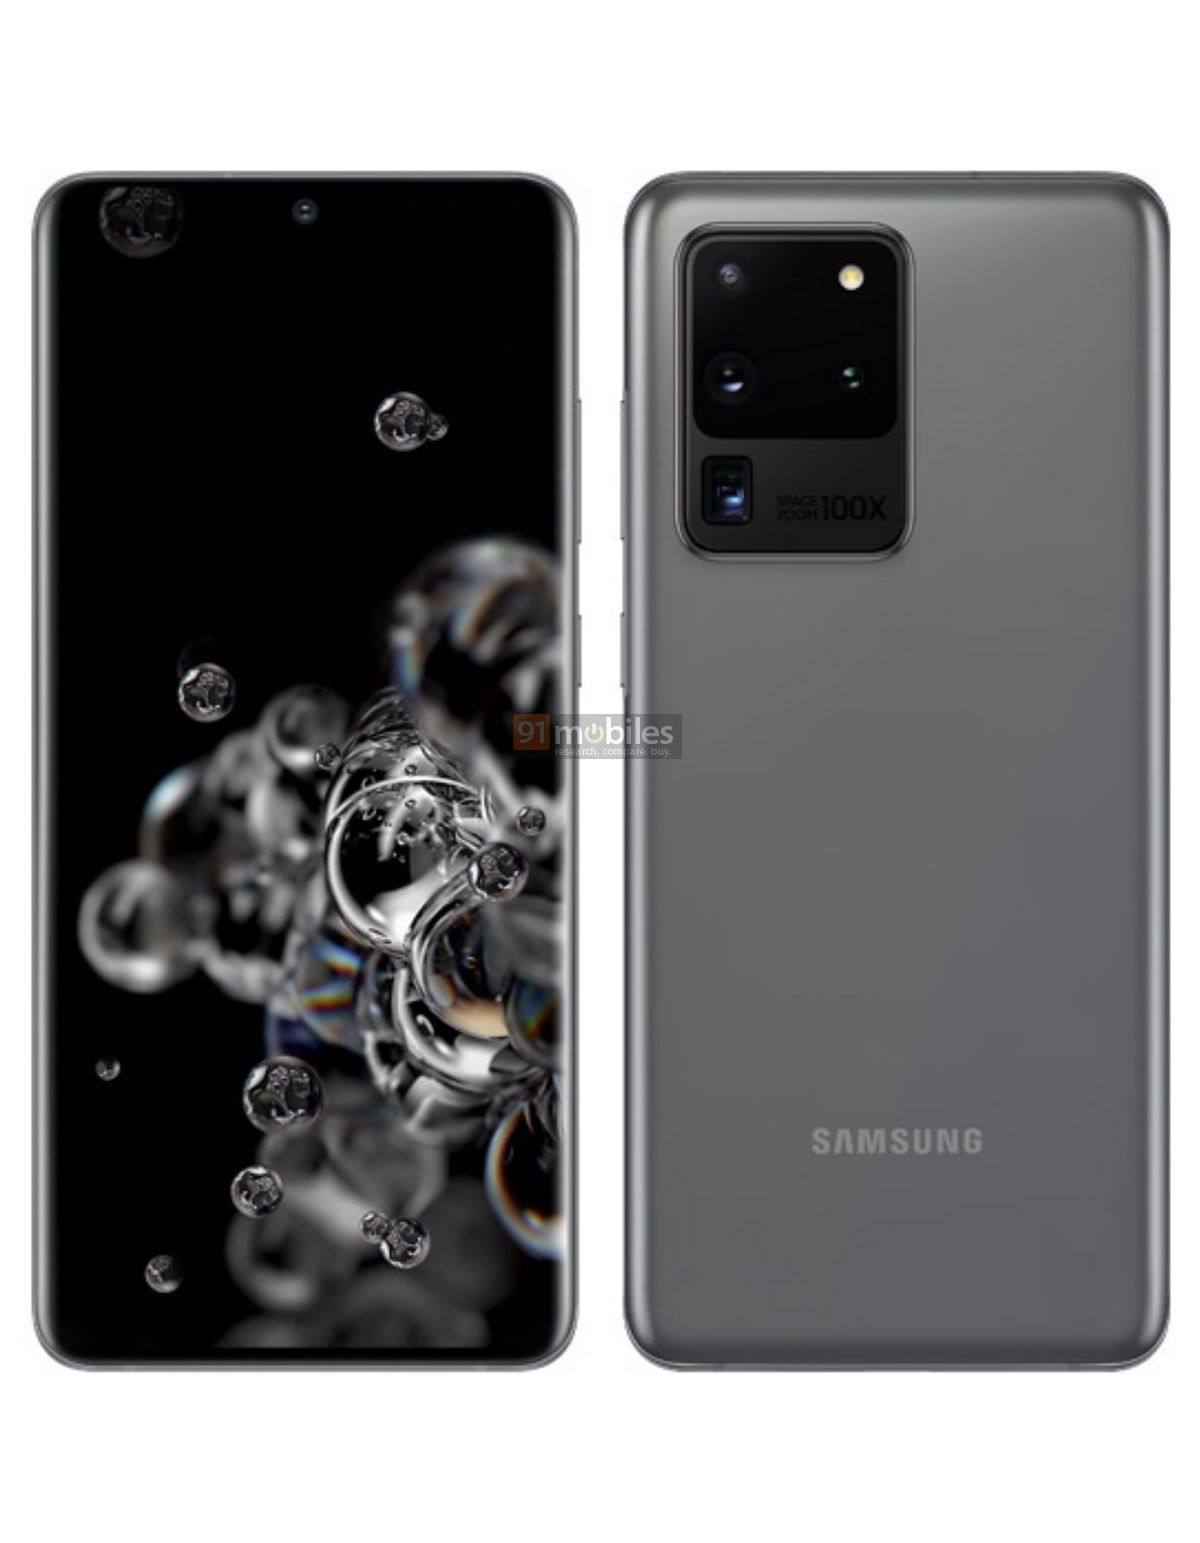 Exclusive Samsung Galaxy S20 Ultra 5g Official Renders Confirm